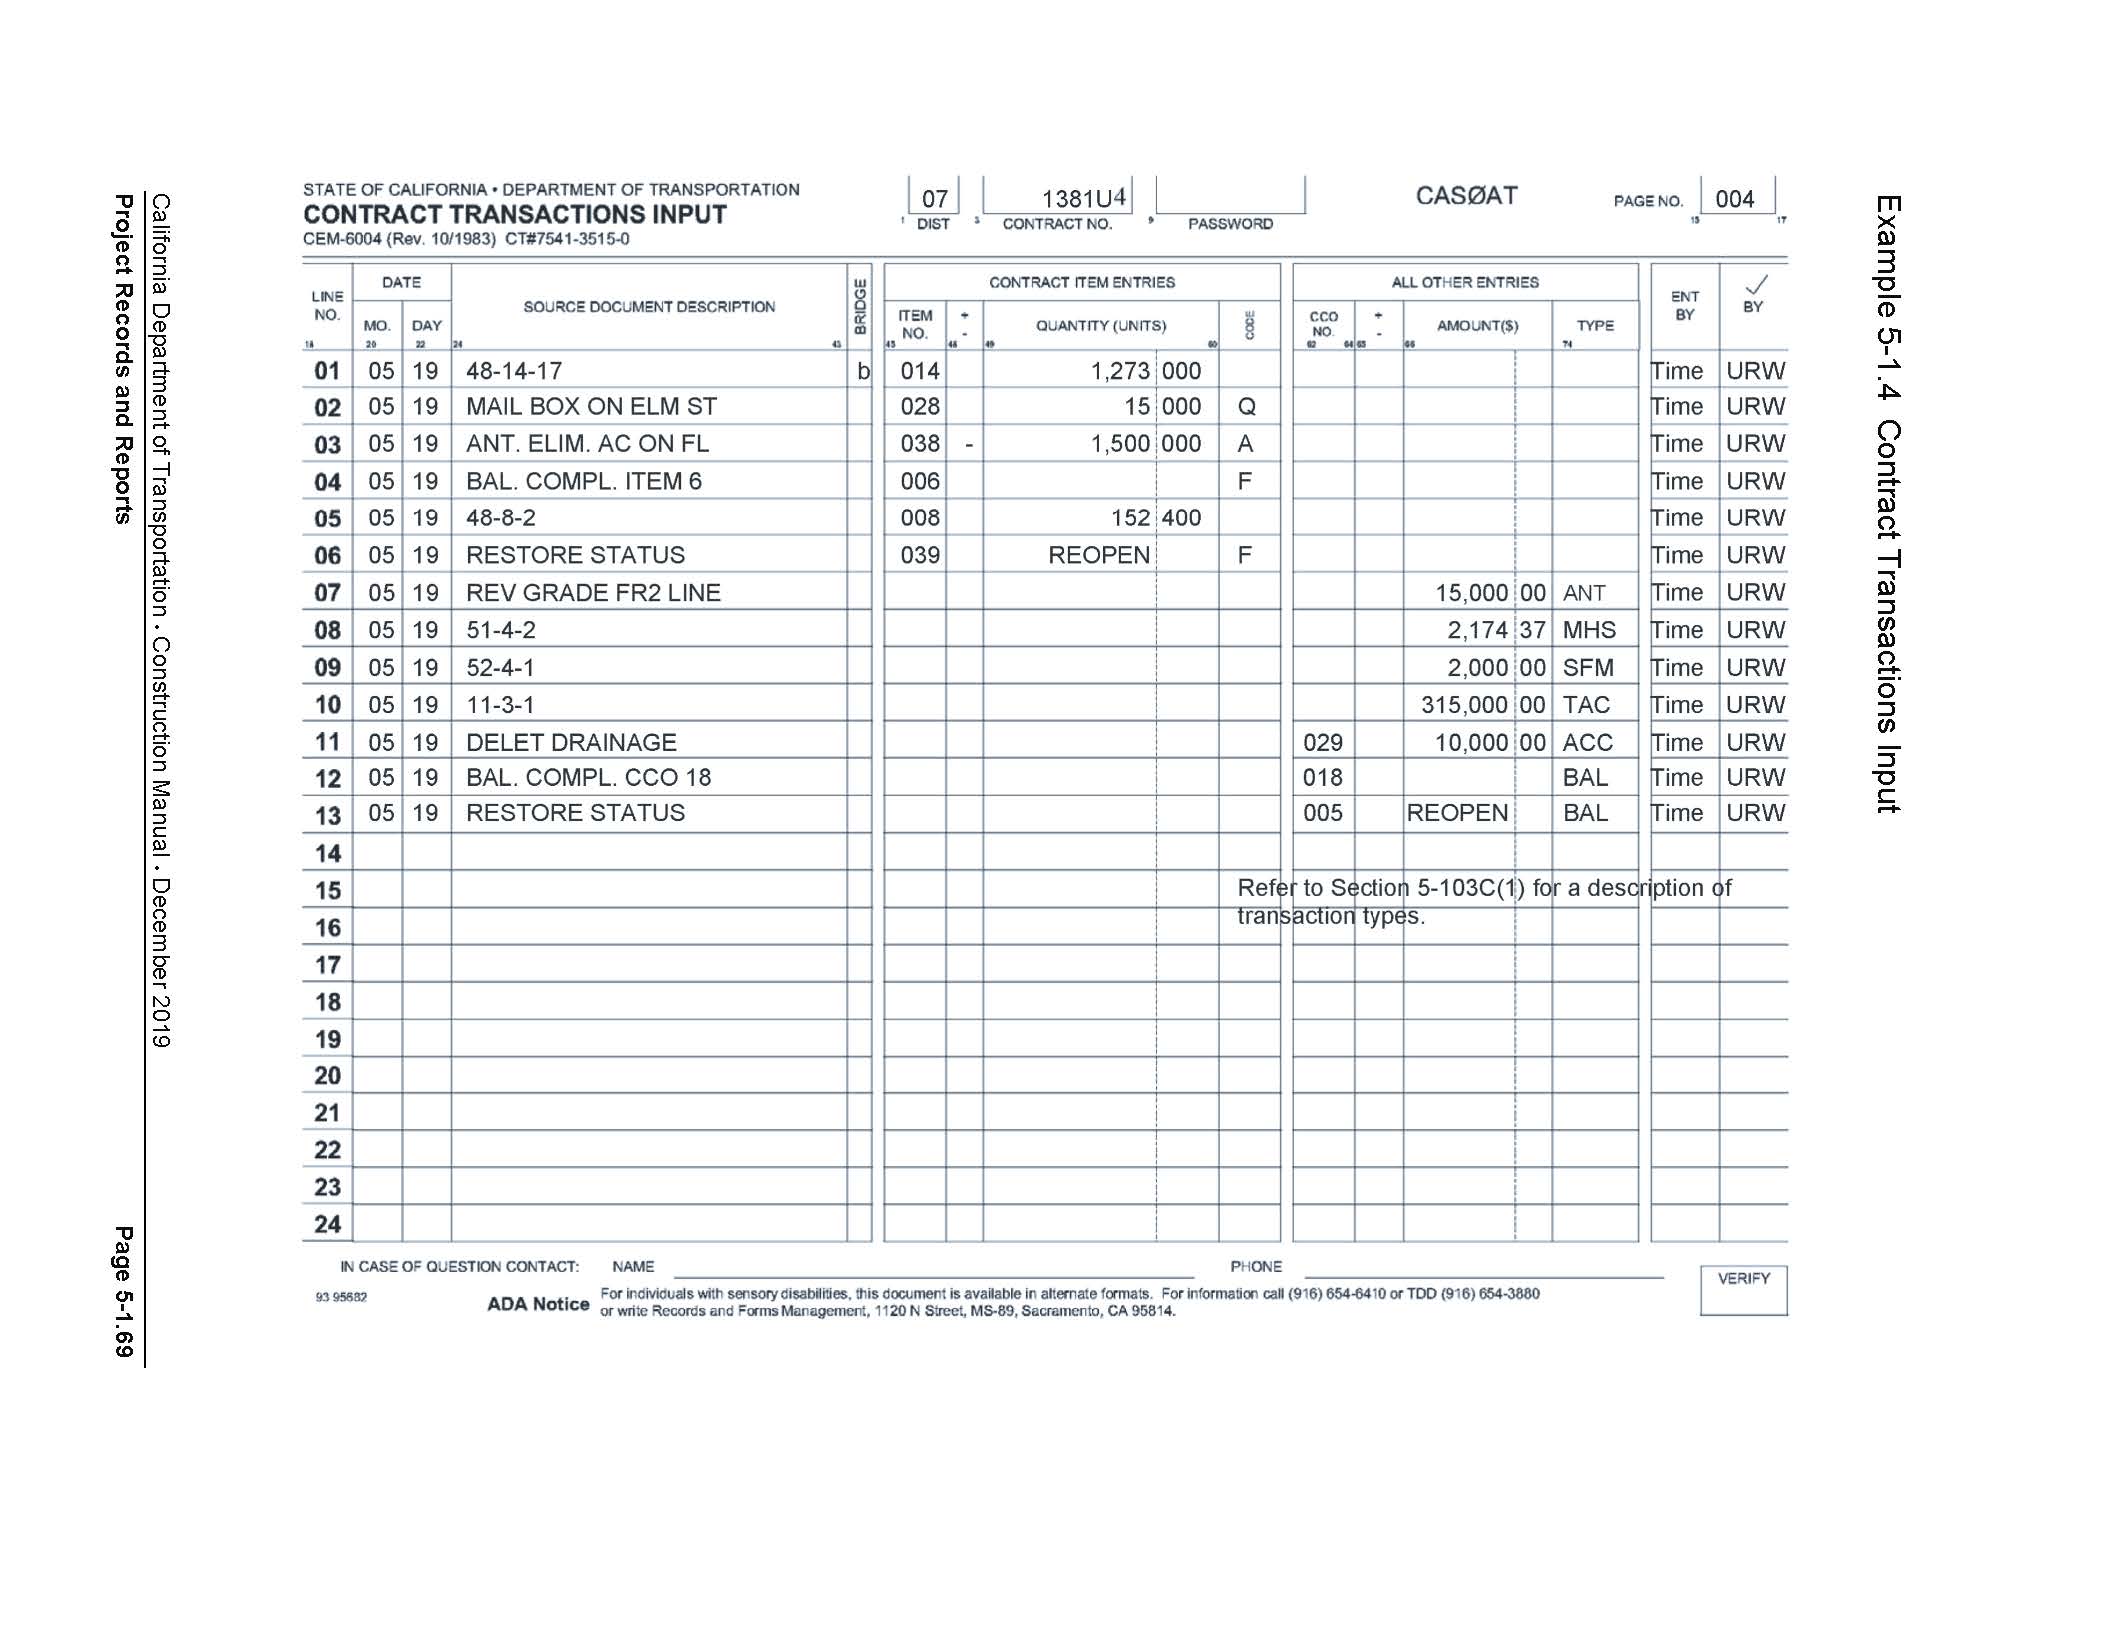 Example of Caltrans' Form CEM-6004 - Contract Transactions Input